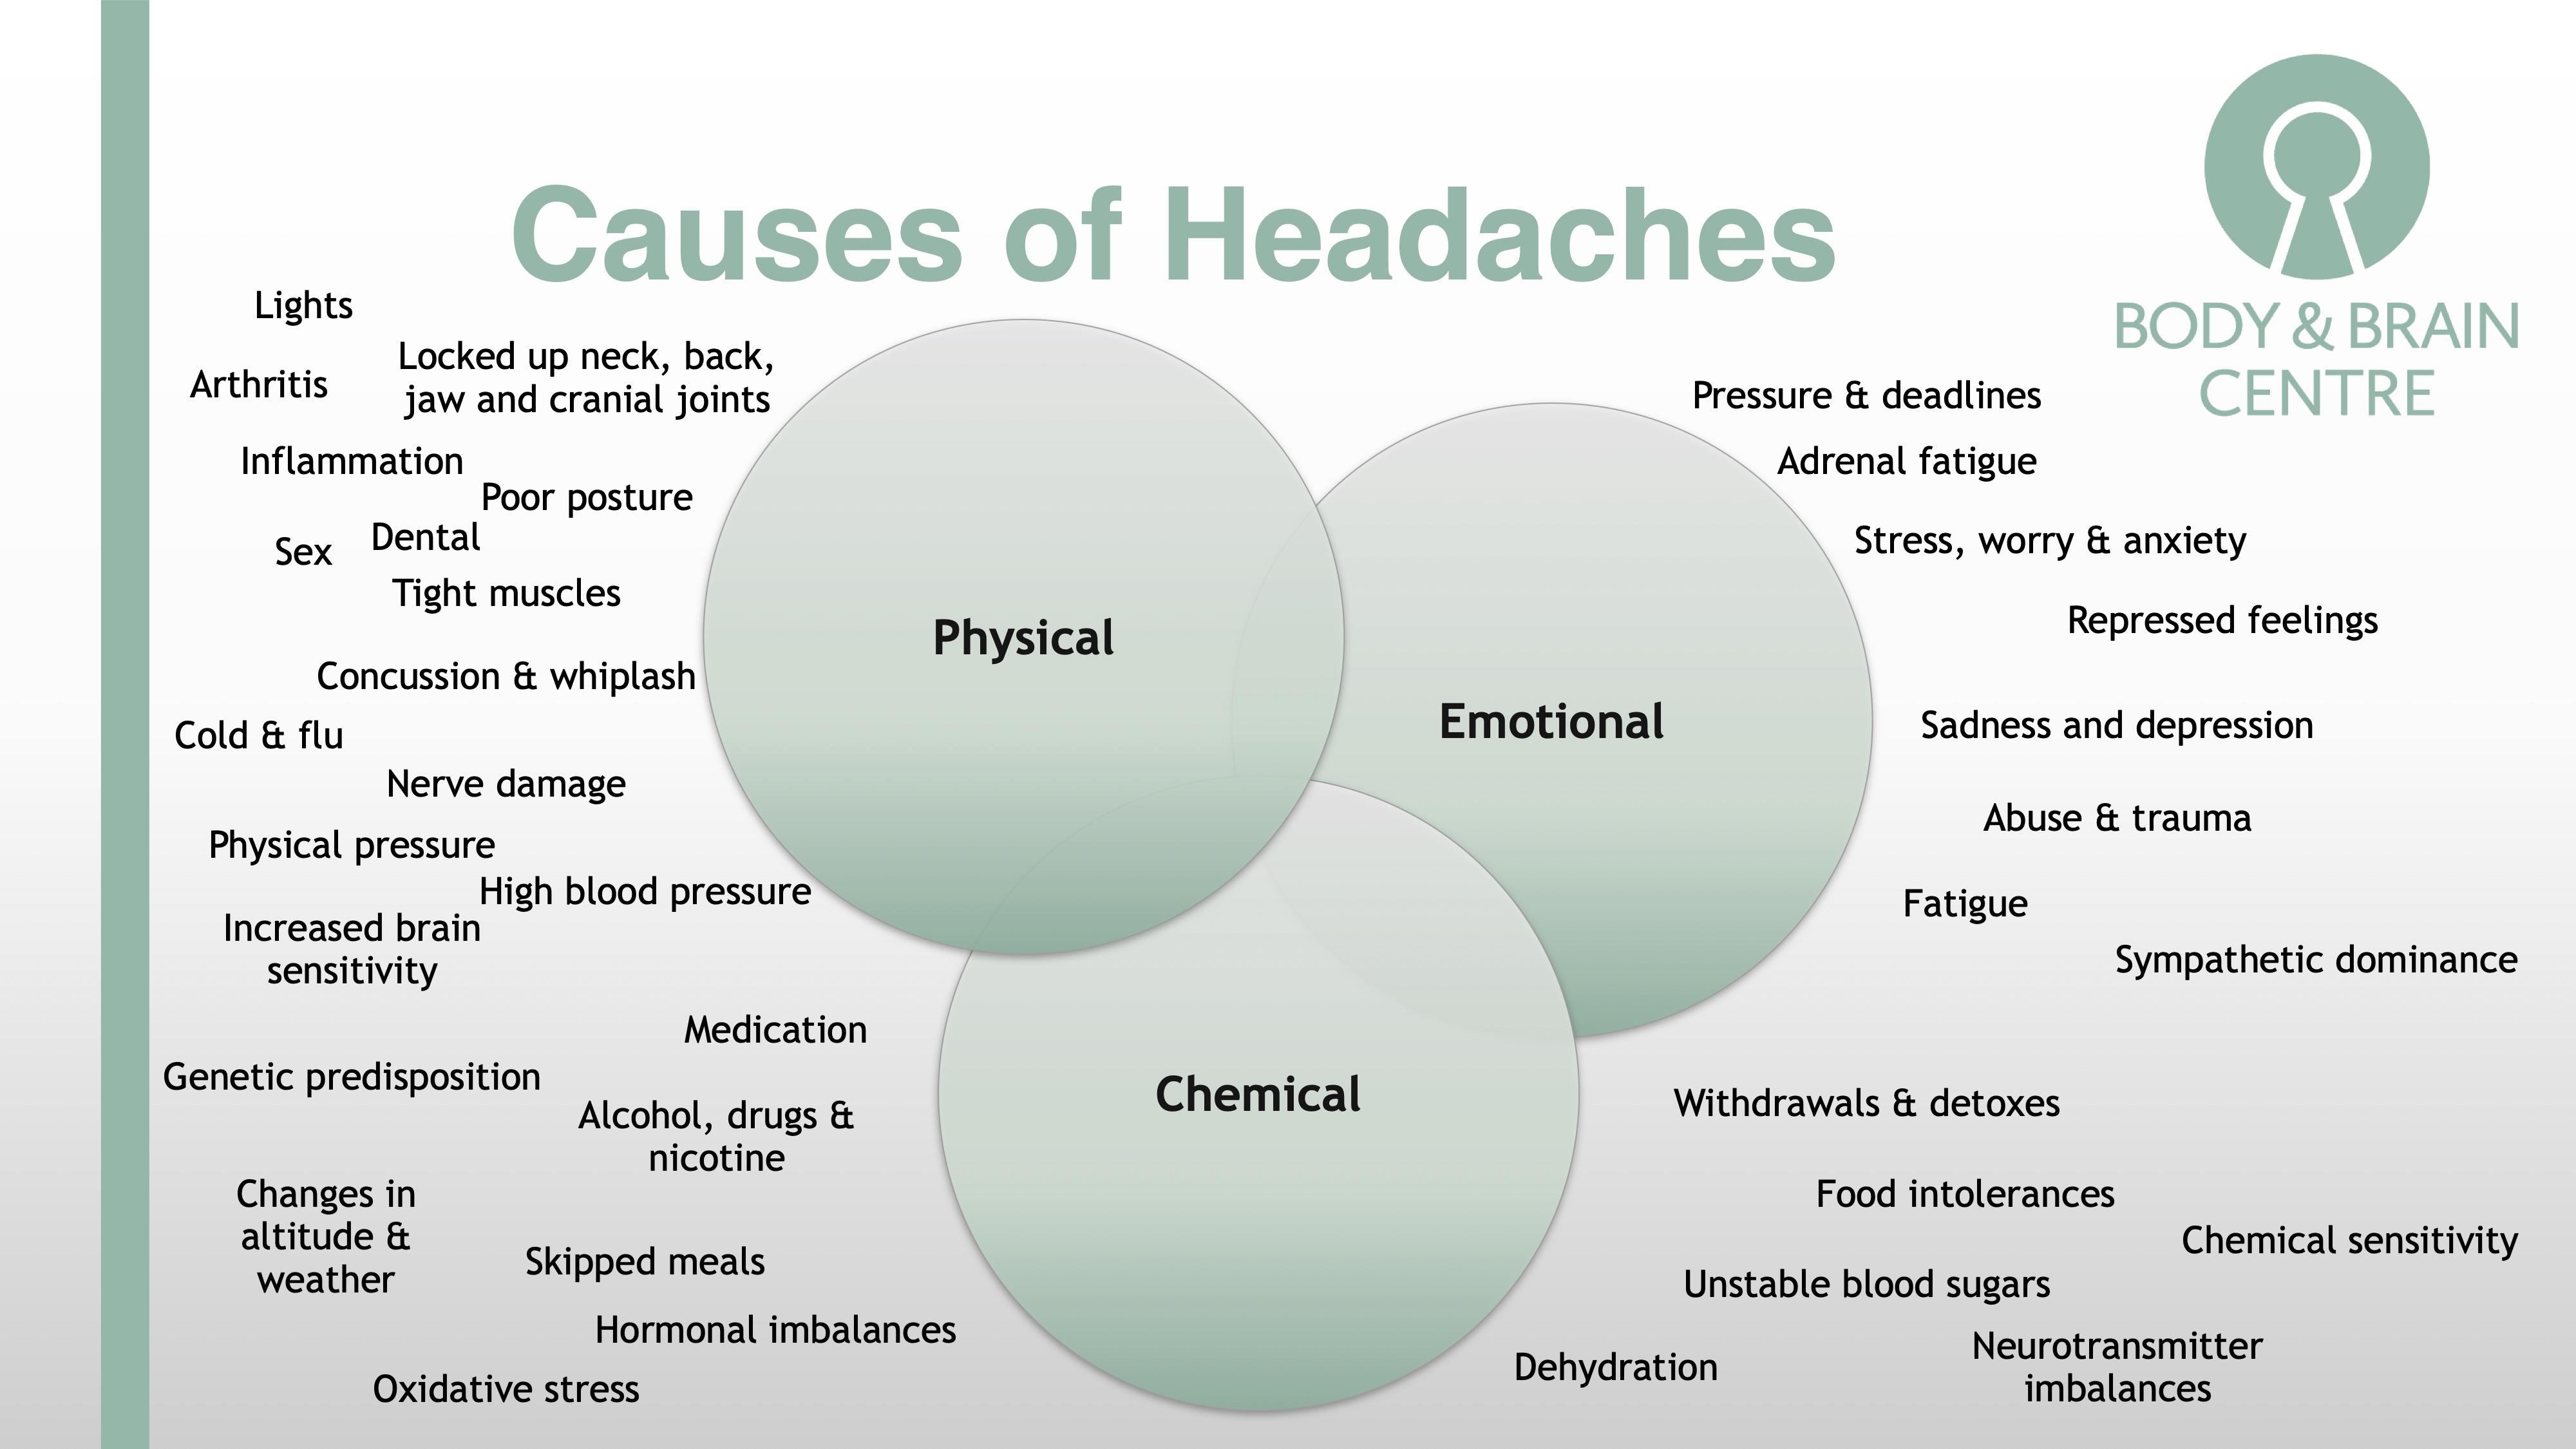 what is your hypothesis about the causes of jane's headaches